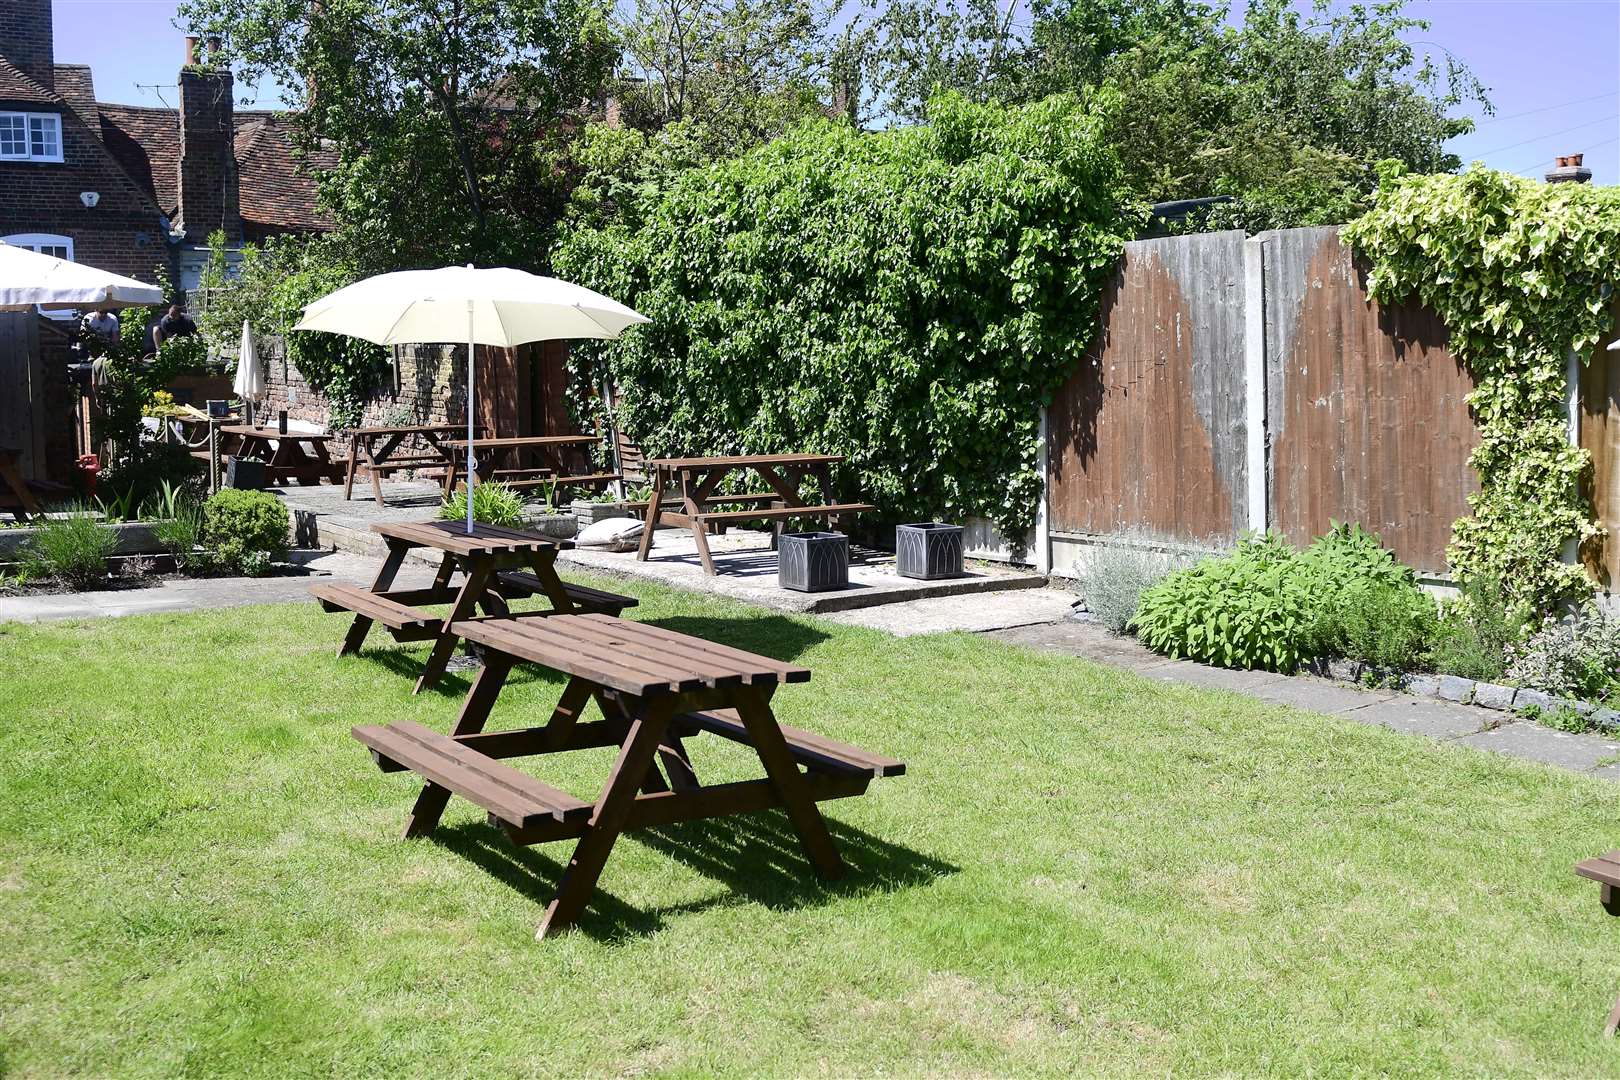 The outdoor seating at The Monument pub in Canterbury. Picture: Barry Goodwin